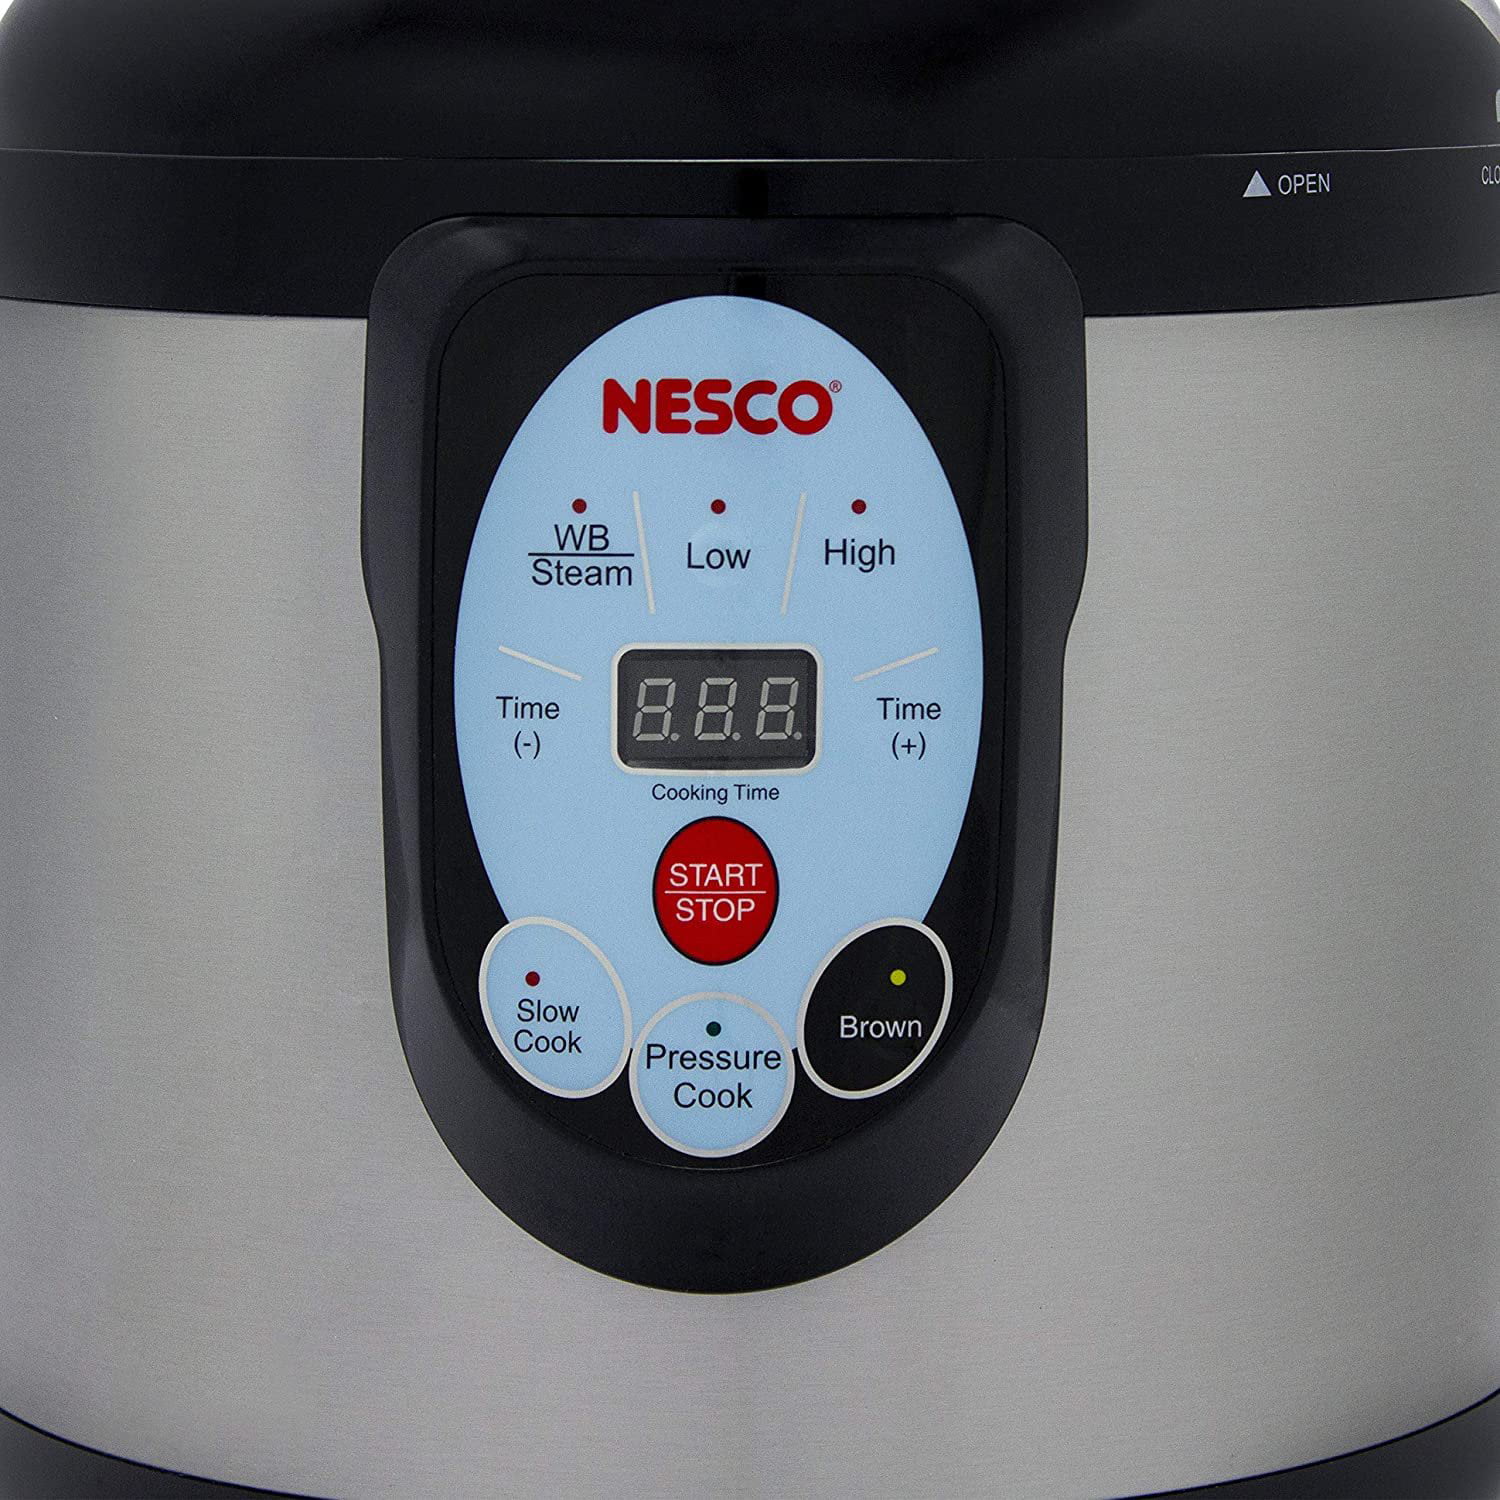 How to use the NESCO Electric Pressure Canner - Hawk Point Hobby HomeStead